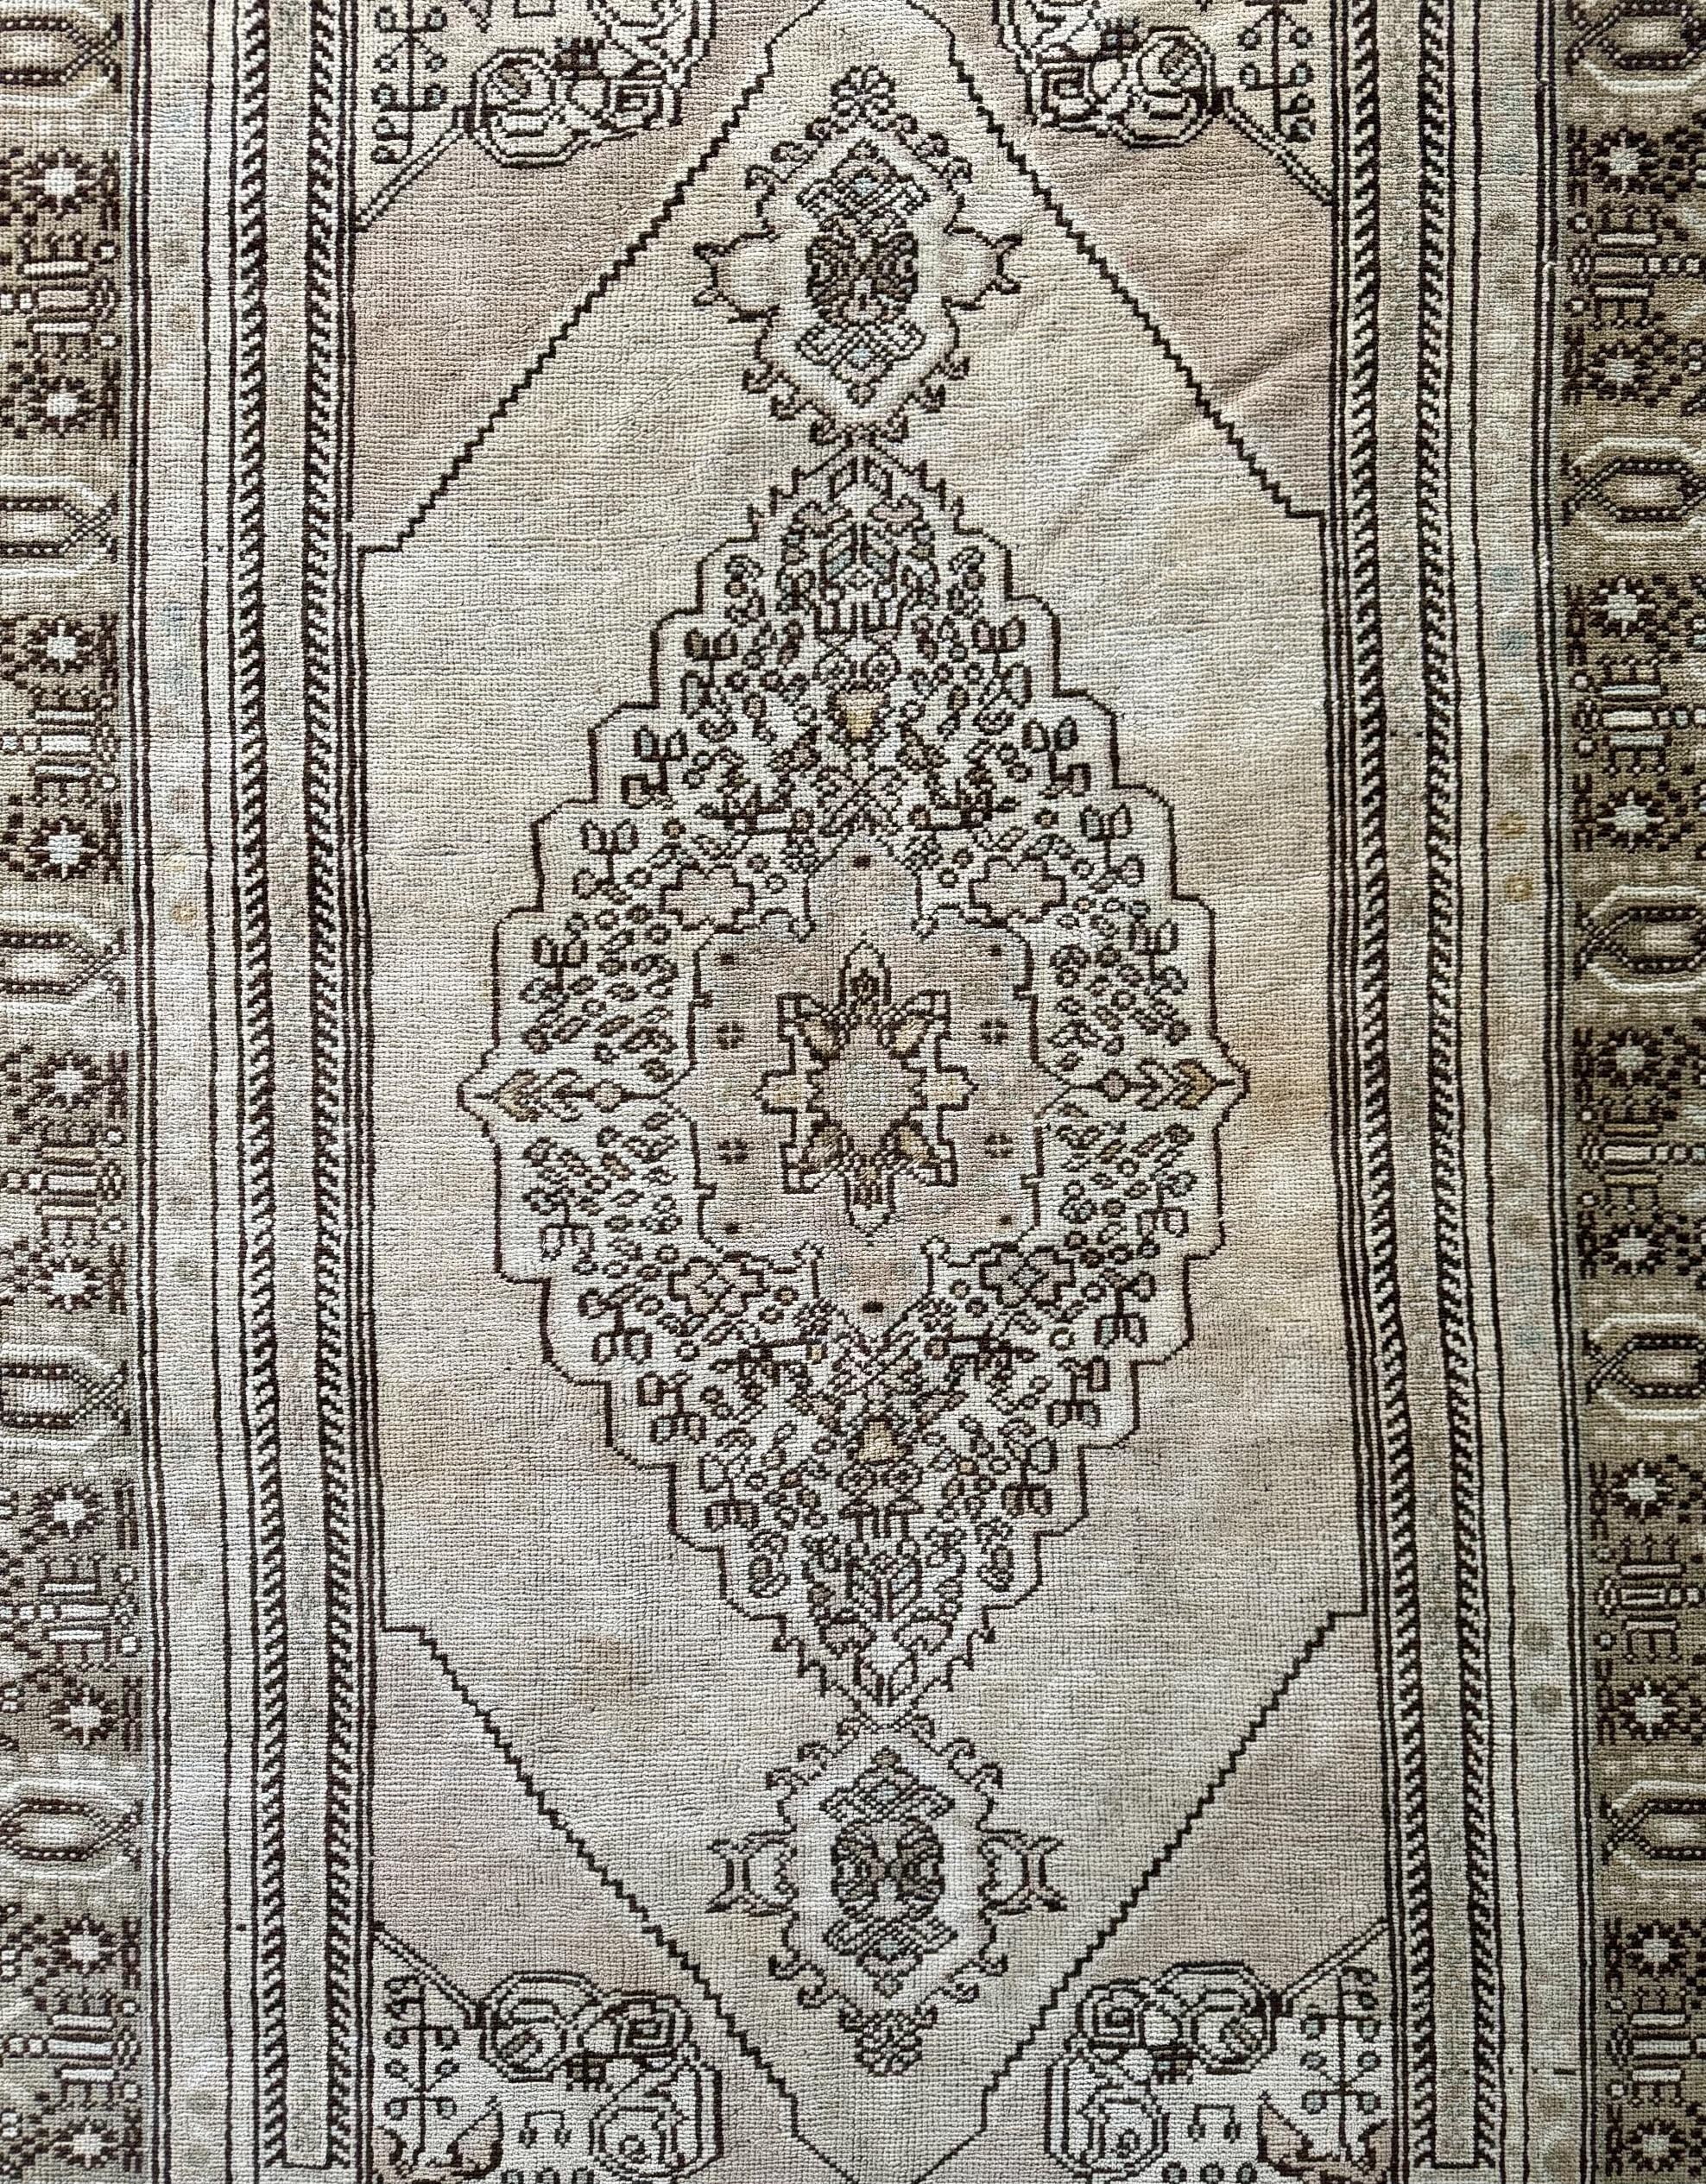 A vintage Oushak rug from the 1940s in mint condition is a treasure that combines historical significance, craftsmanship, and timeless beauty.

Oushak rugs are highly regarded for their distinctive weaving techniques and exquisite designs